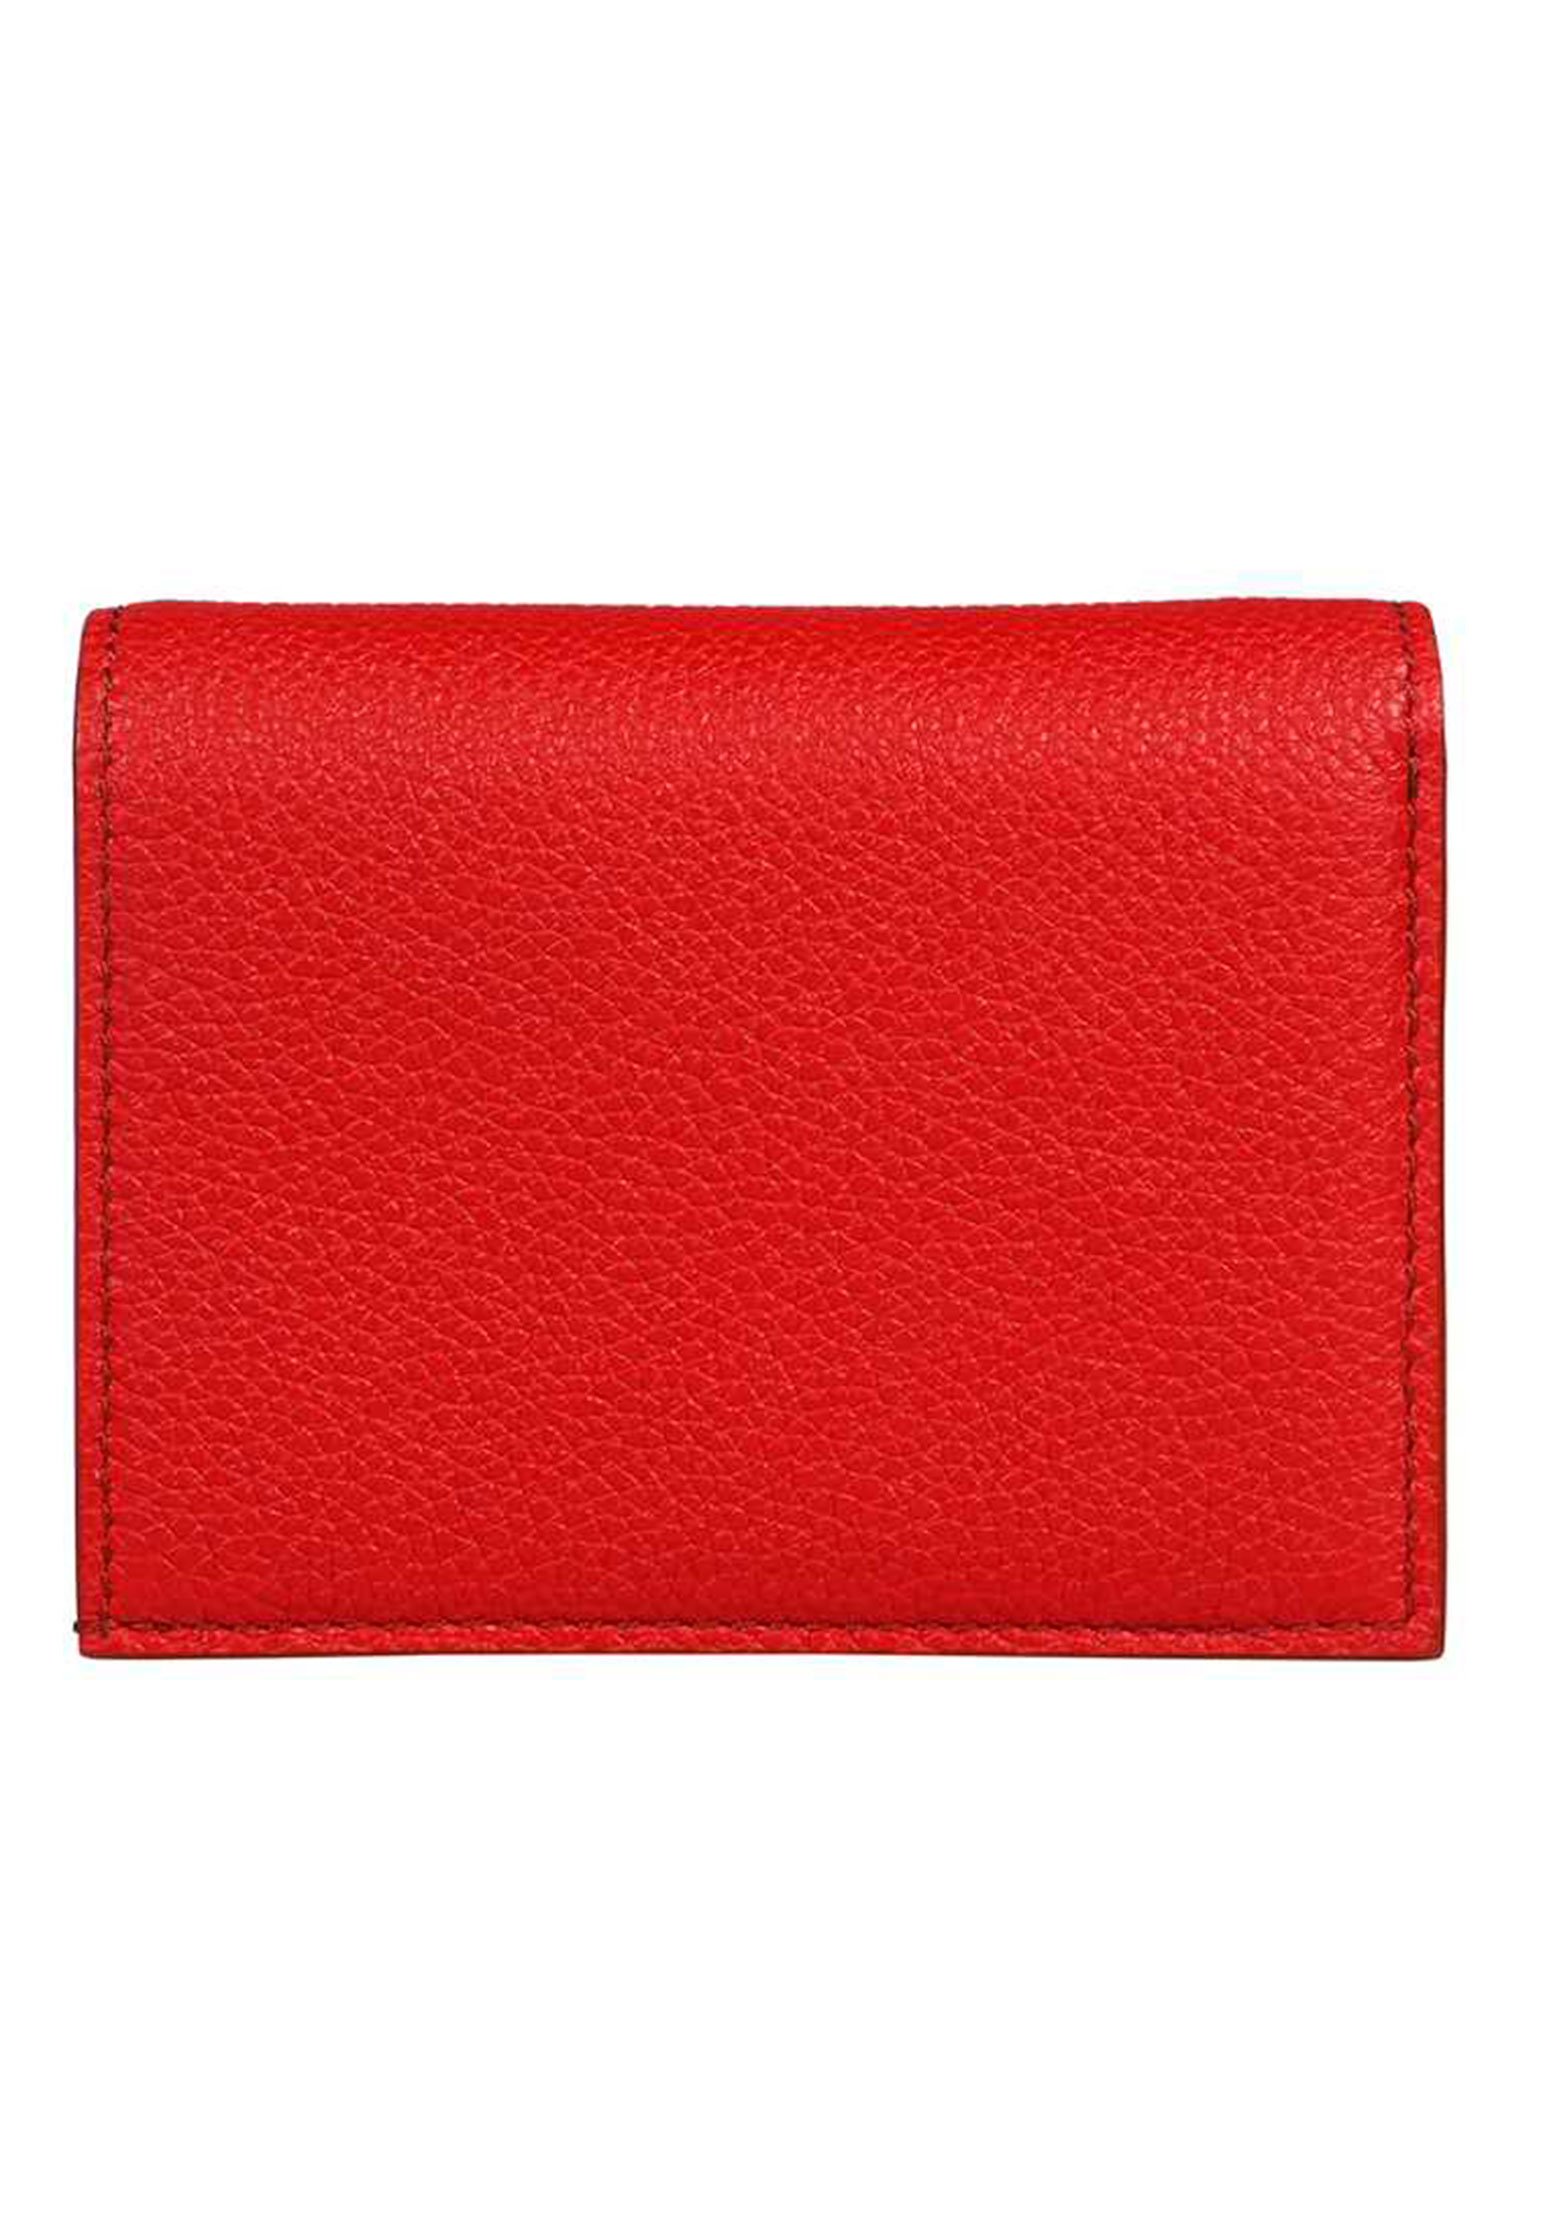 Mini wallet TOM FORD Color: red (Code: 1096) in online store Allure